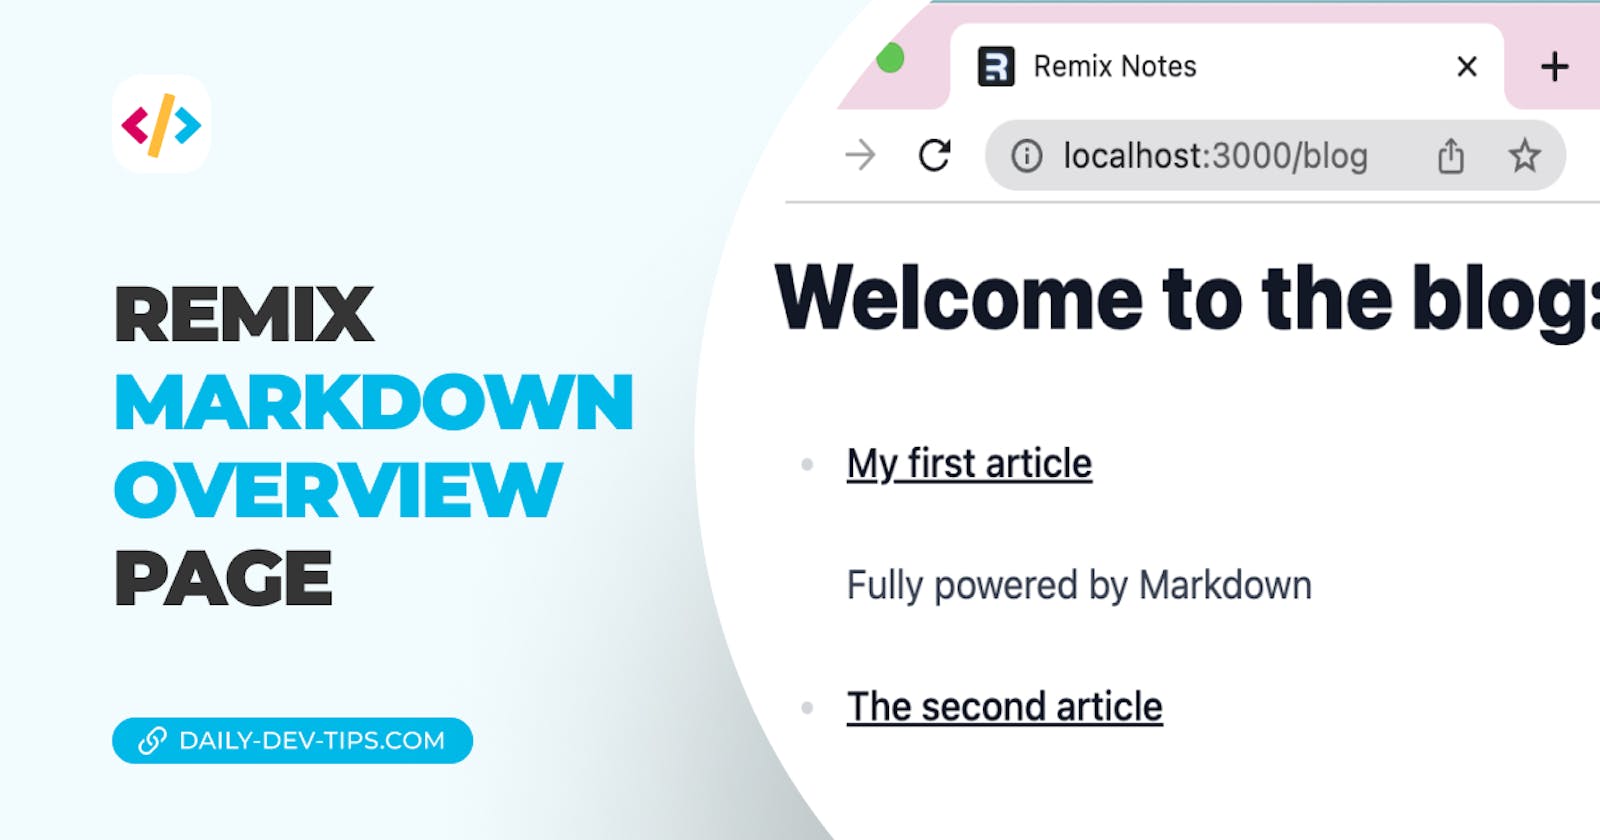 Remix Markdown overview page